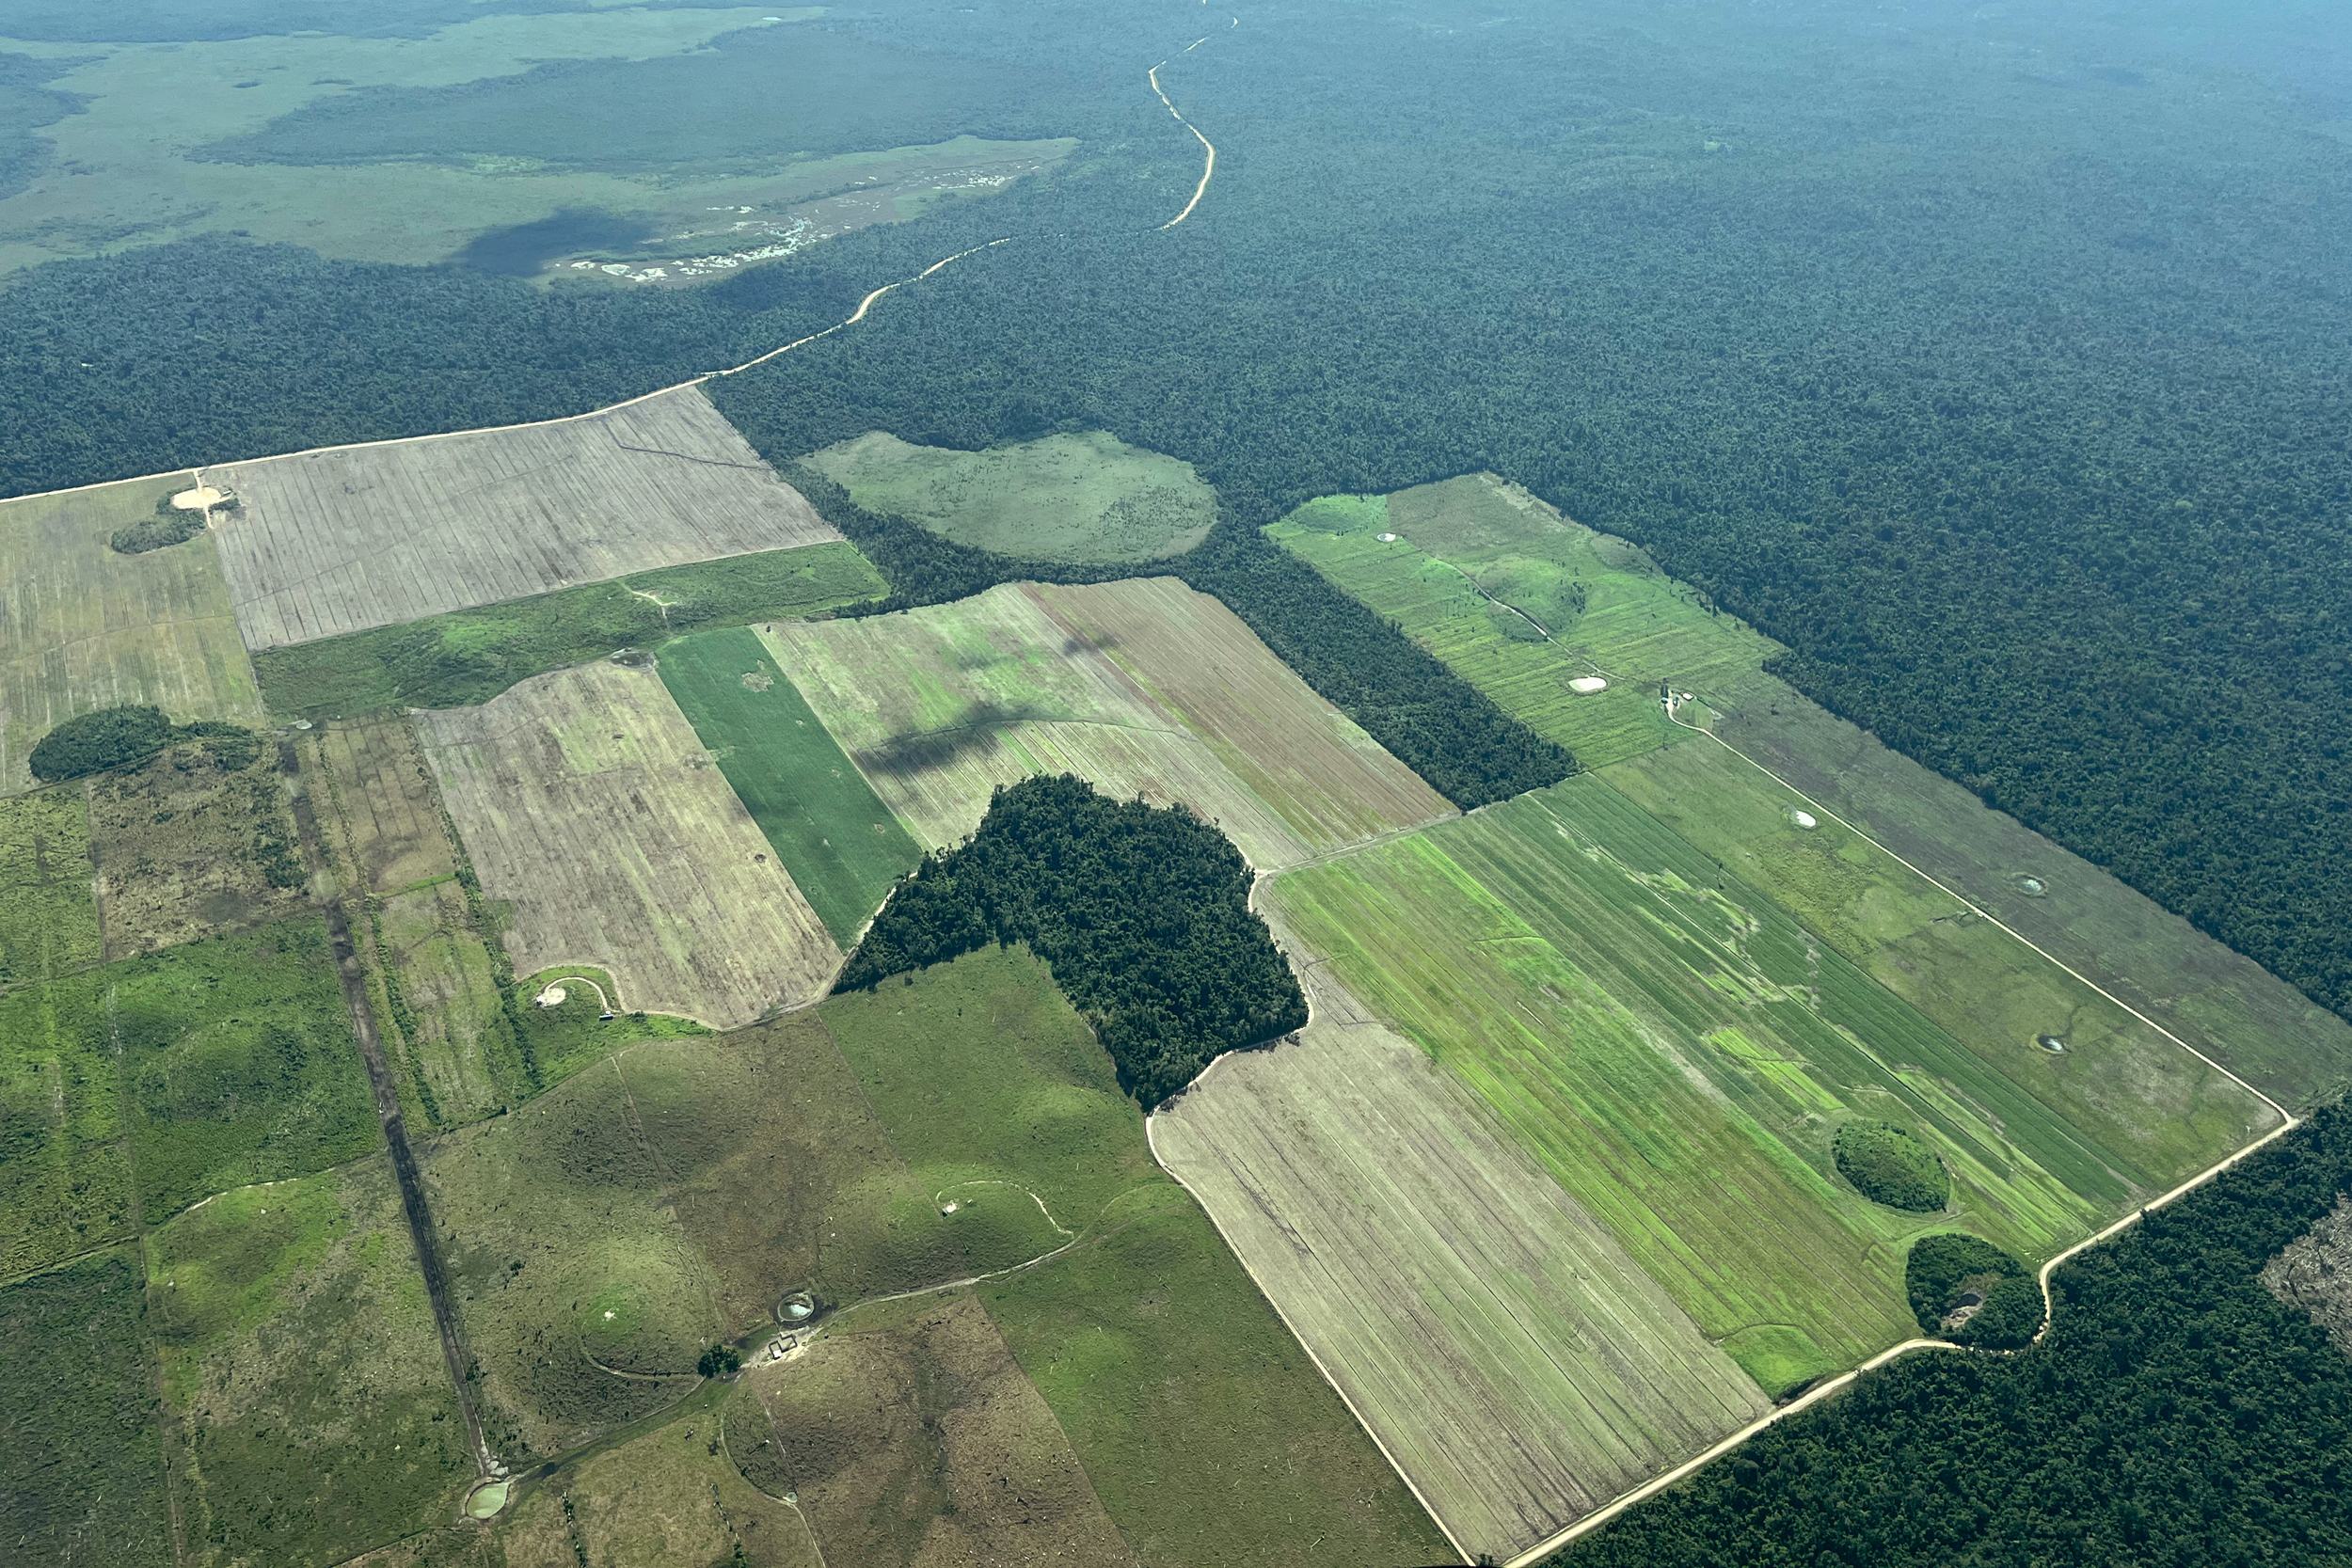 Farmers have cleared jungle right to the edge of the Belize Maya Forest, a private preserve run by a nonprofit trust established in 2021 to halt the further spread of agricultural development. Credit: Nicholas Kusnetz/Inside Climate News